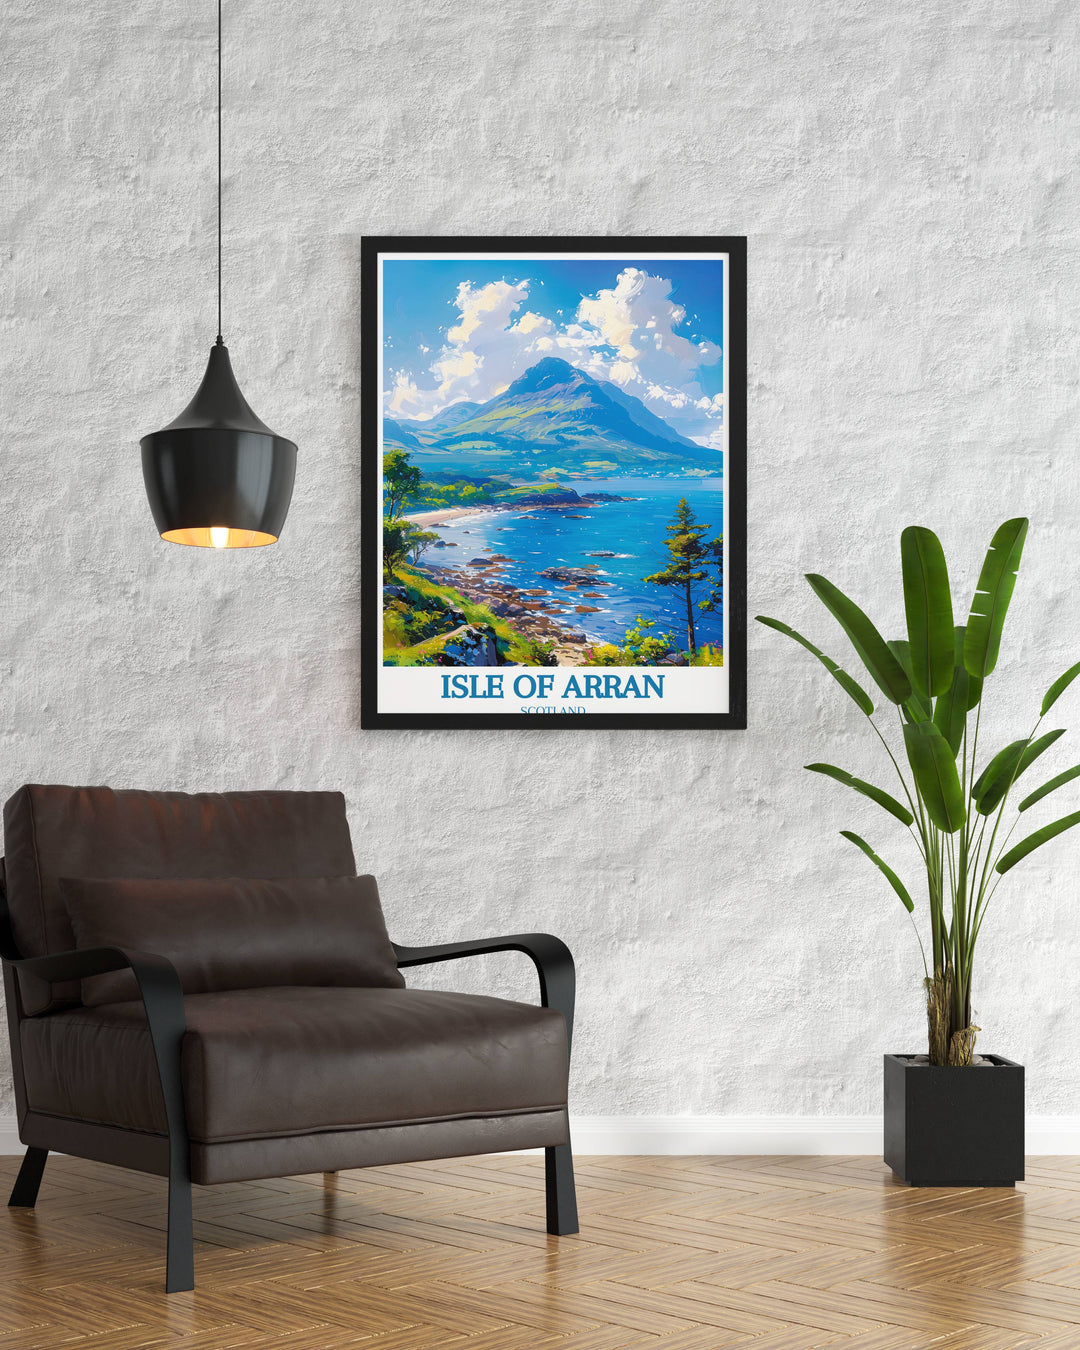 Captivating Scotland art print capturing the rugged beauty of the Isle of Arrans coastline and rolling hills.